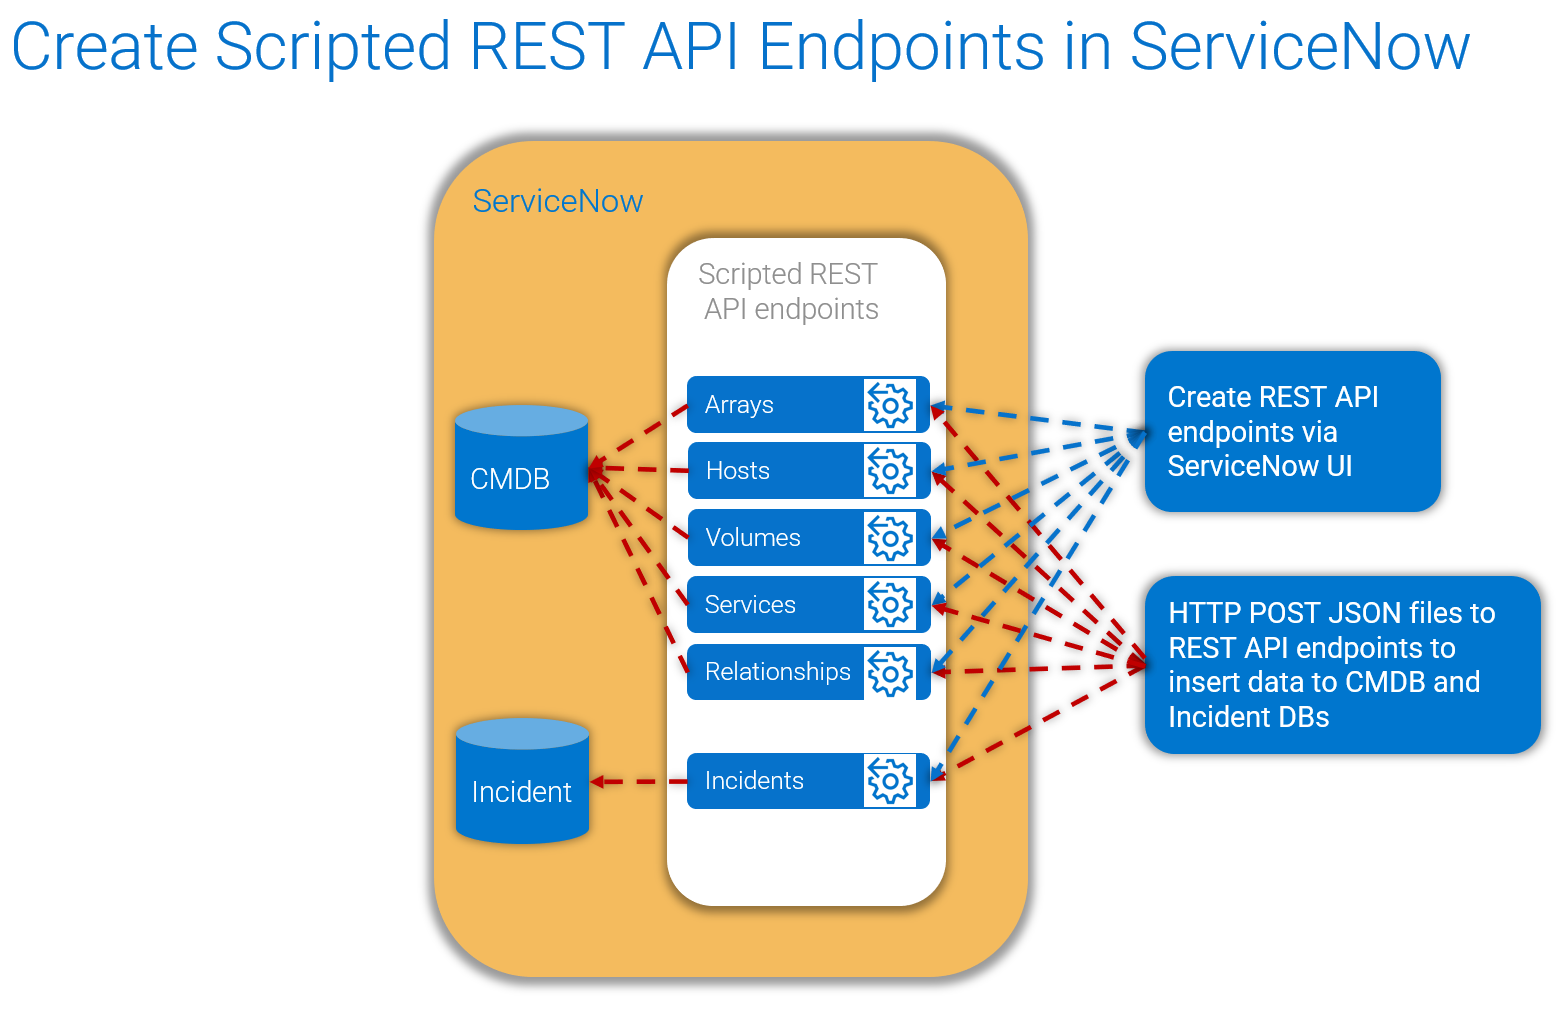 This diagram shows how to create Scripted REST API endpoints in ServiceNow. 